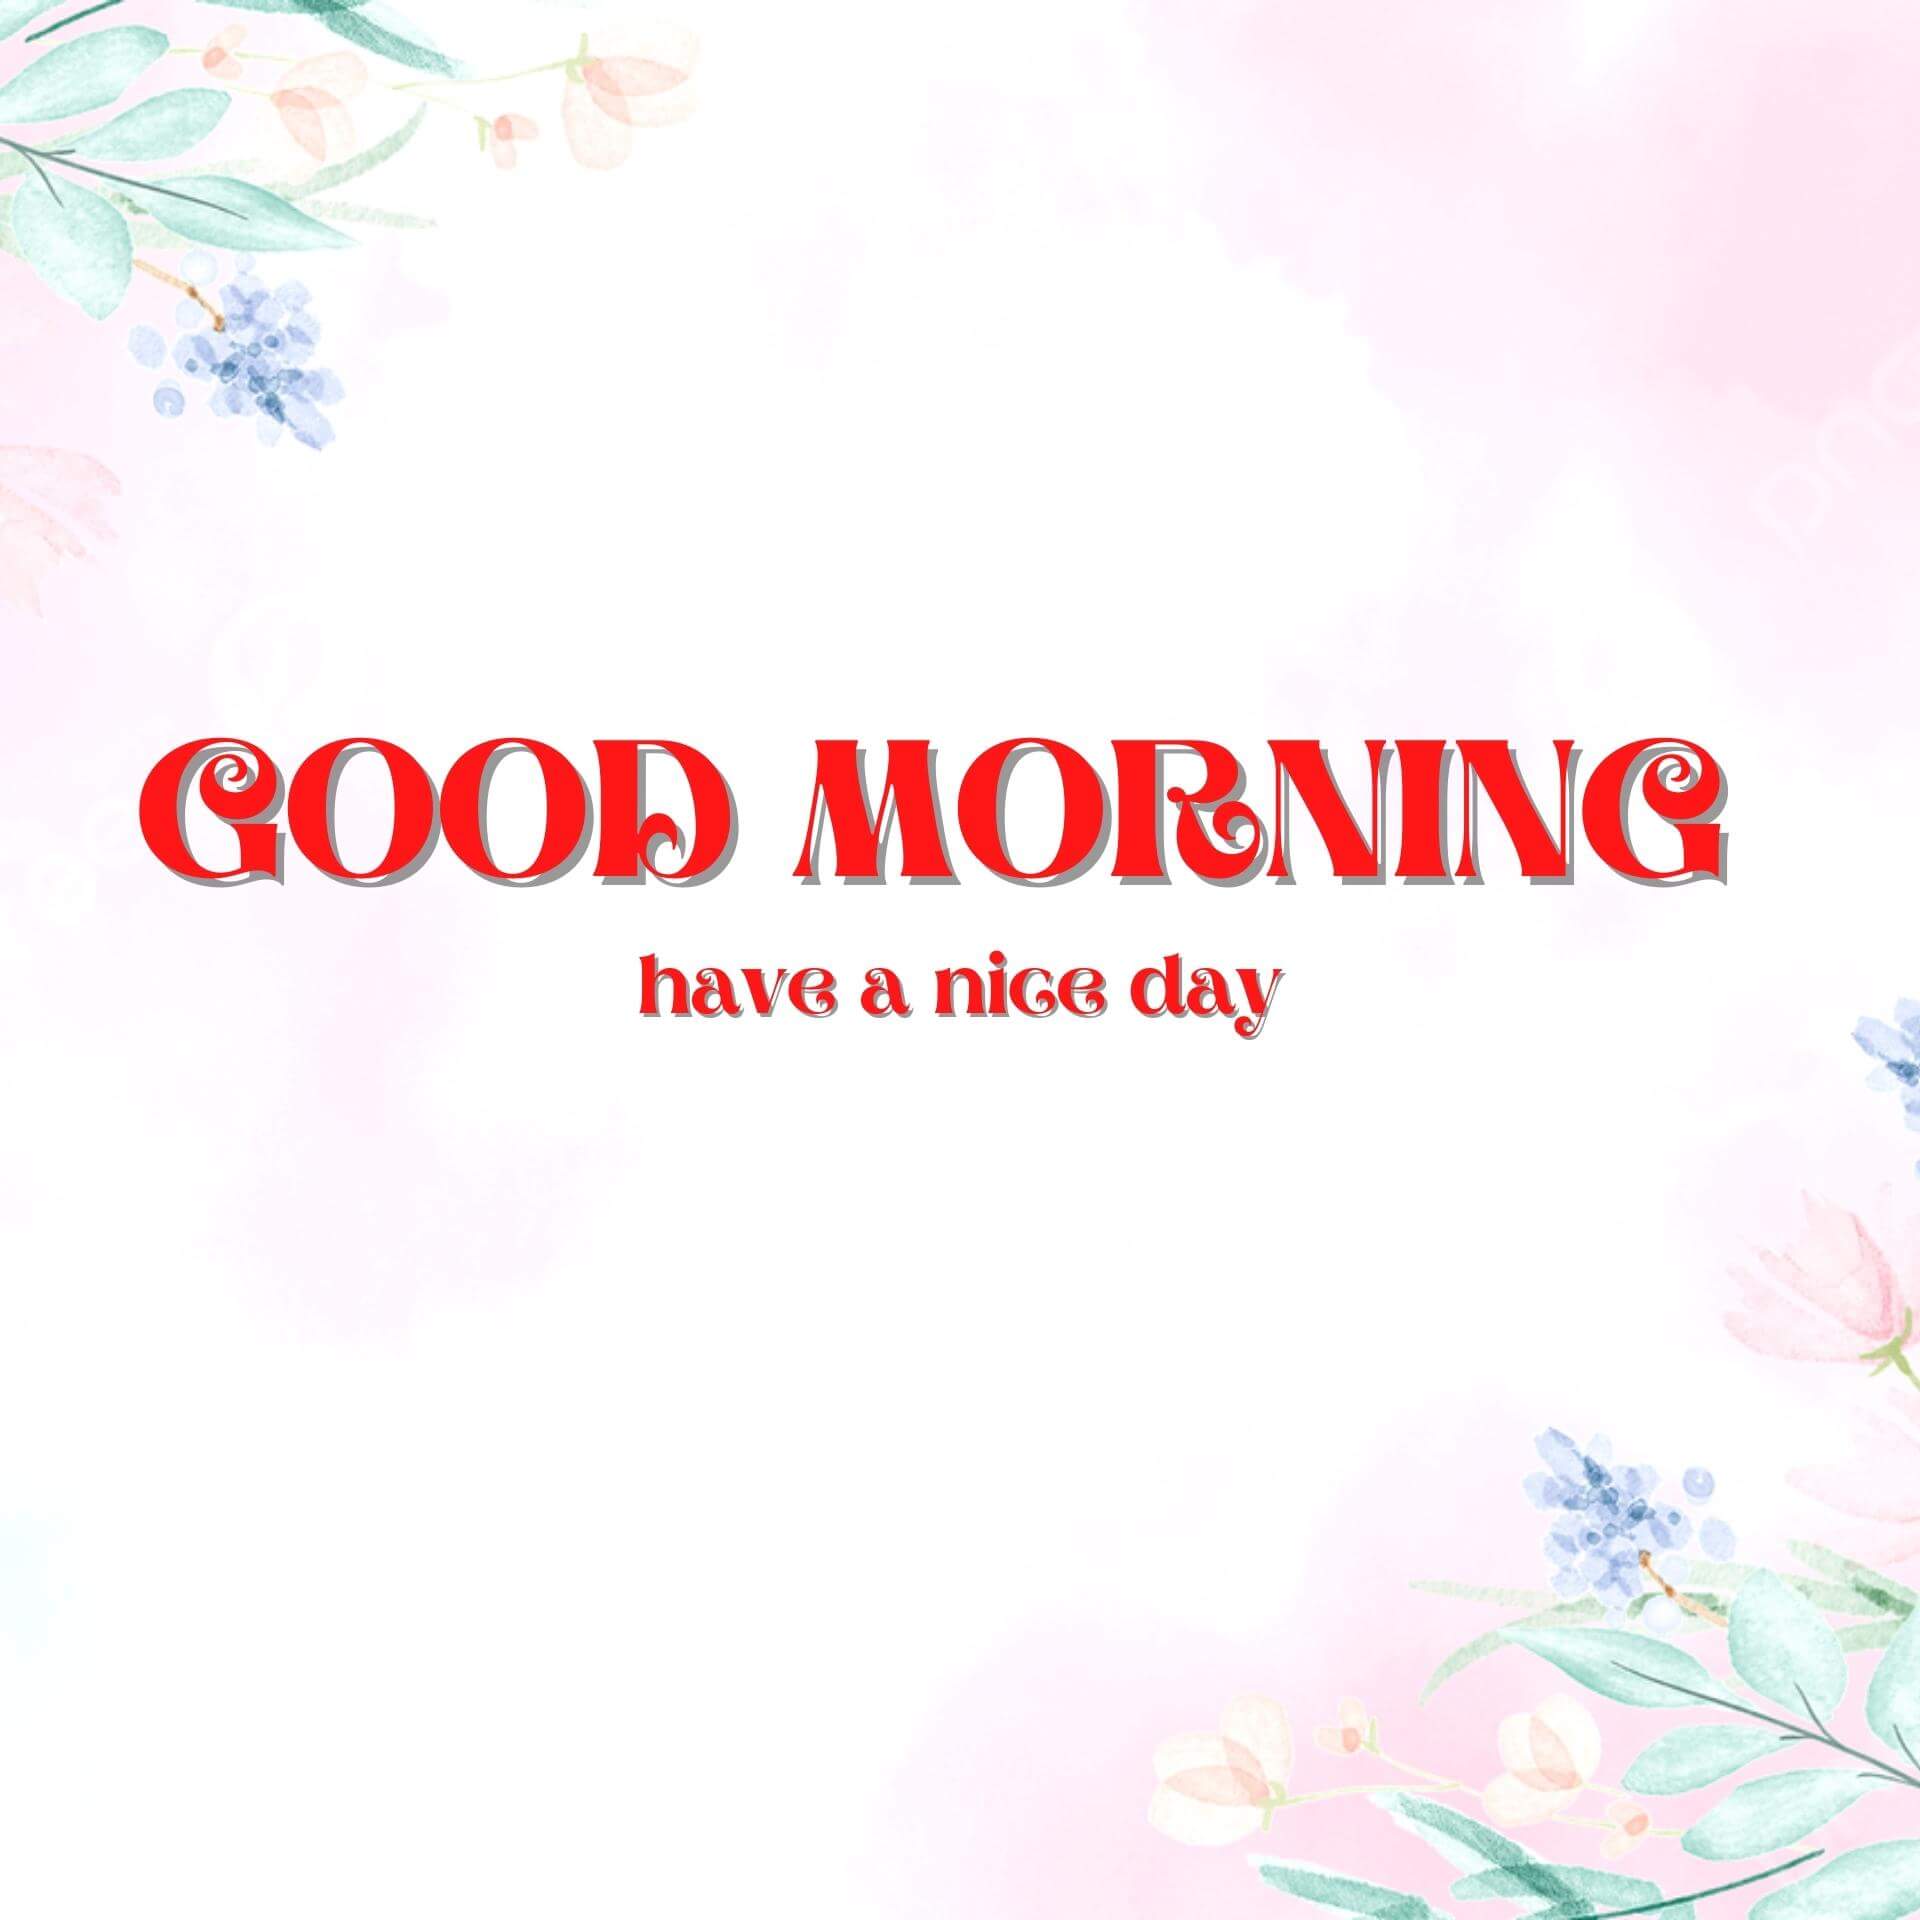 Special Good Morning Images pics Free Download